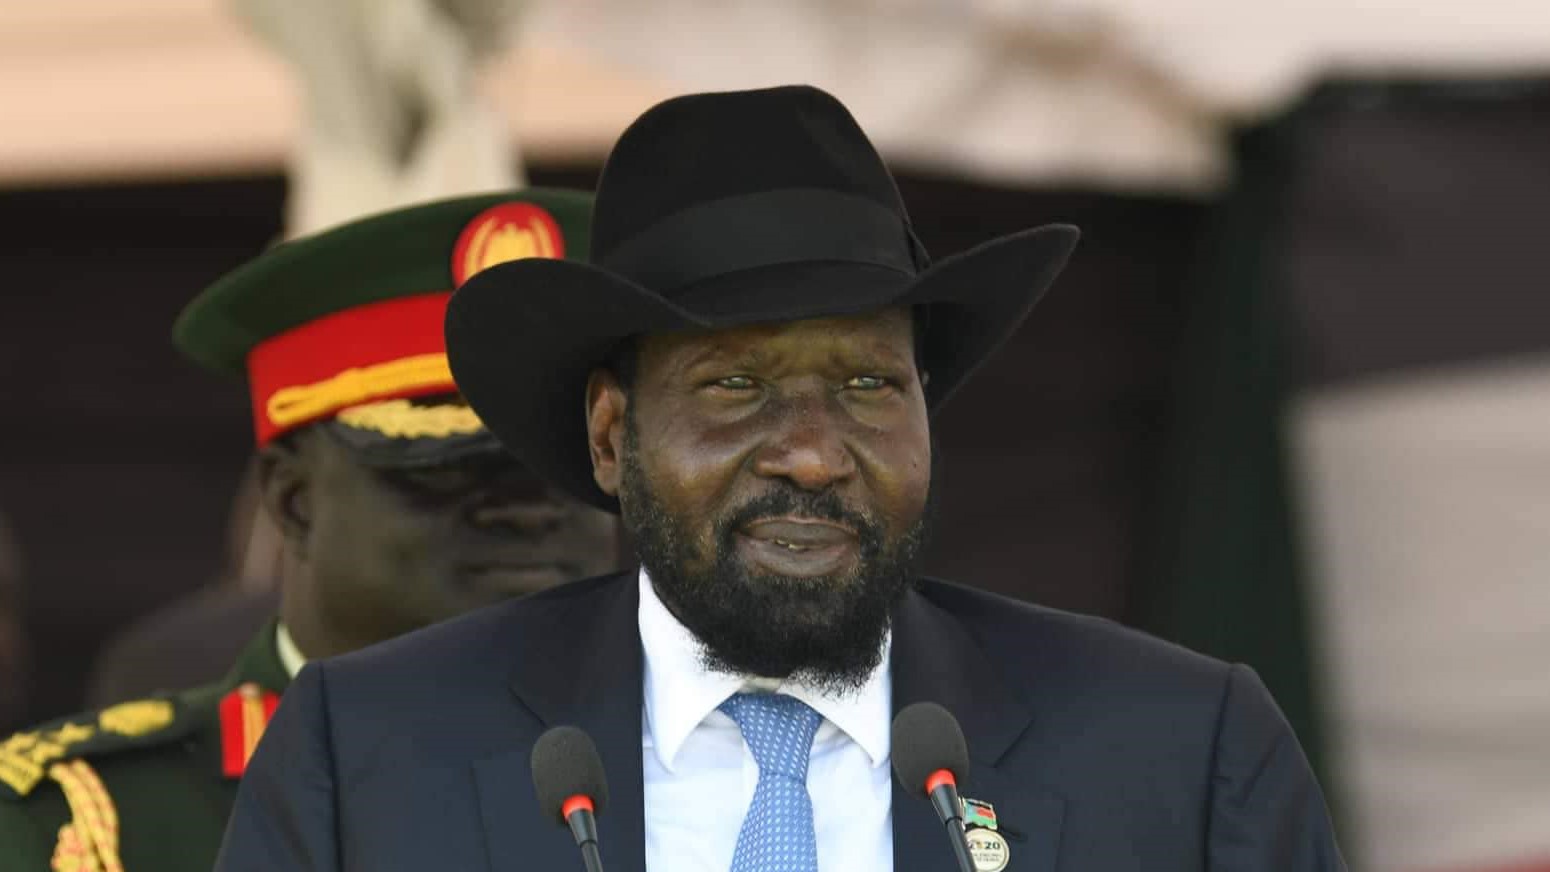 Kiir appeals to holdout groups to “return home.”